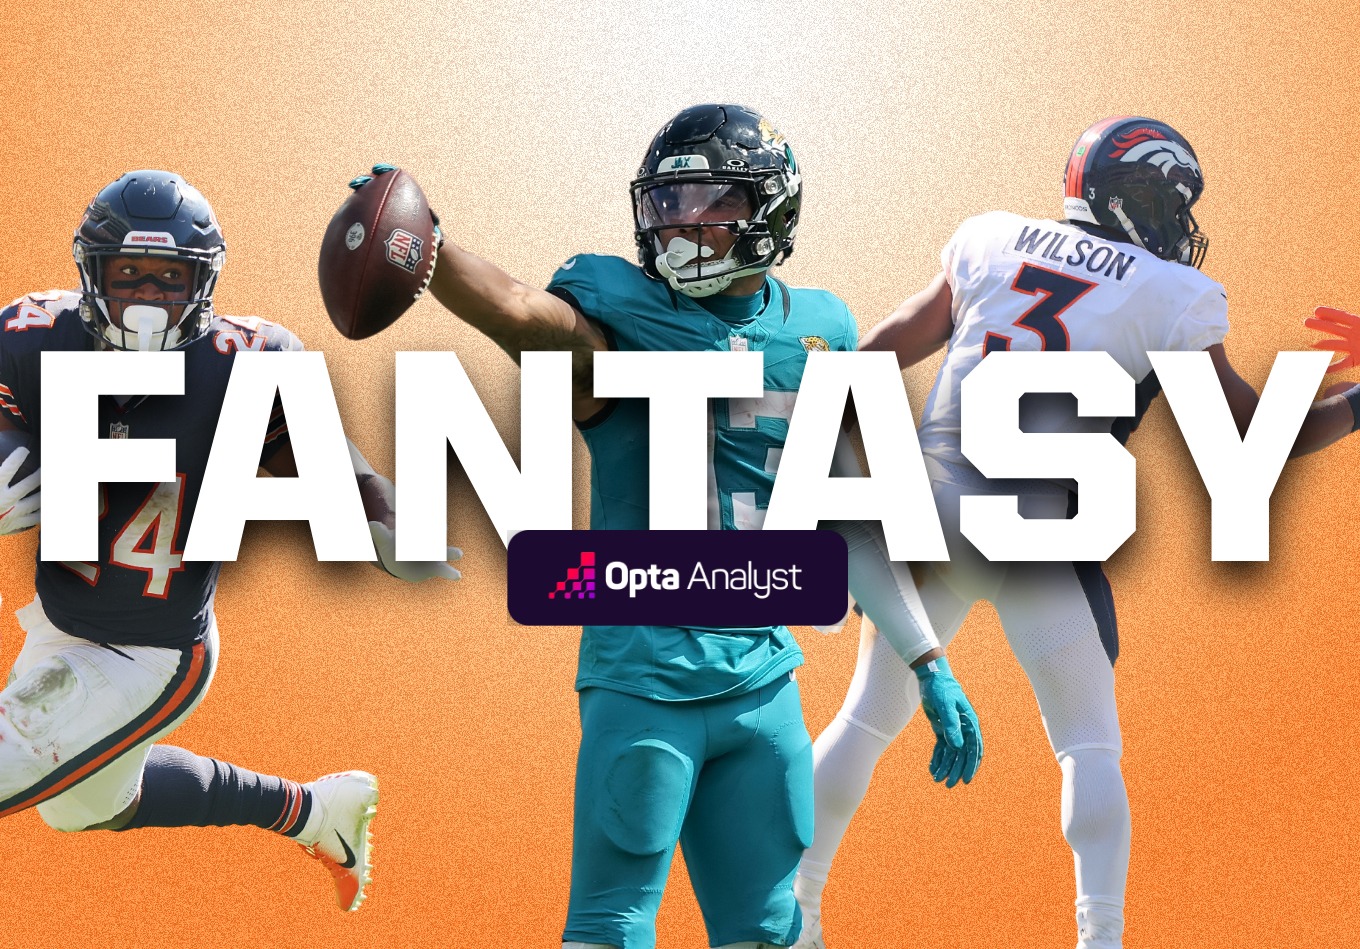 Fantasy Football Draft Rankings: Top 50 Players According to Experts